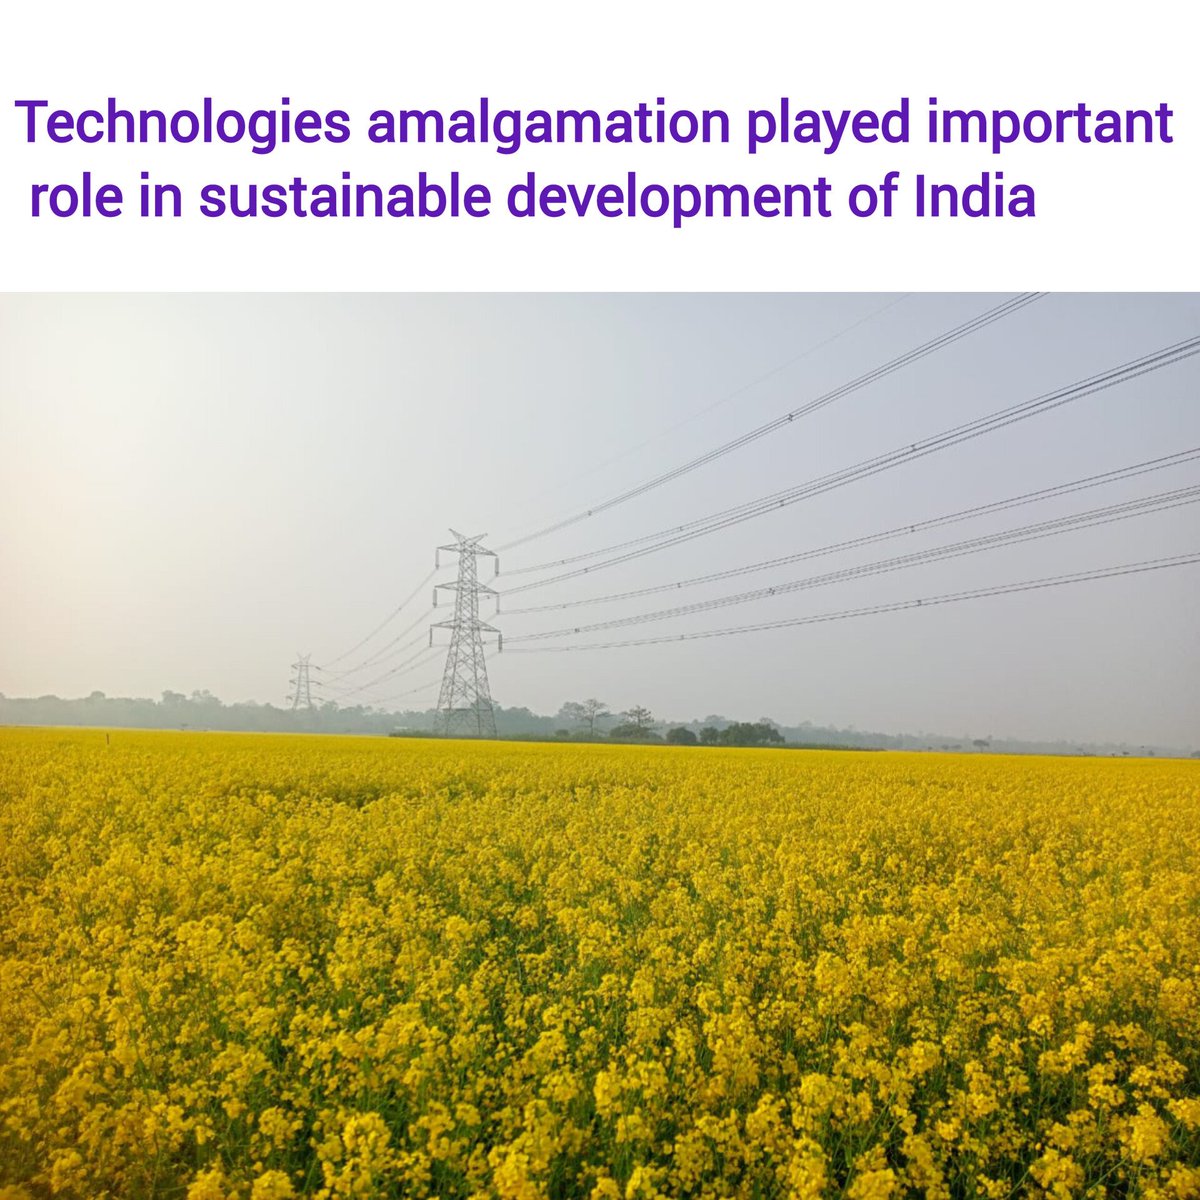 Technologies amalgamation for mankind development.

#Greenrevolution #yellowrevolution 
#SustainableAgriculture
#technology #Agritech
#hydraulicpower
#irrigation #machinery
#AgriculturalEngineering
#PrecisionAgriculture